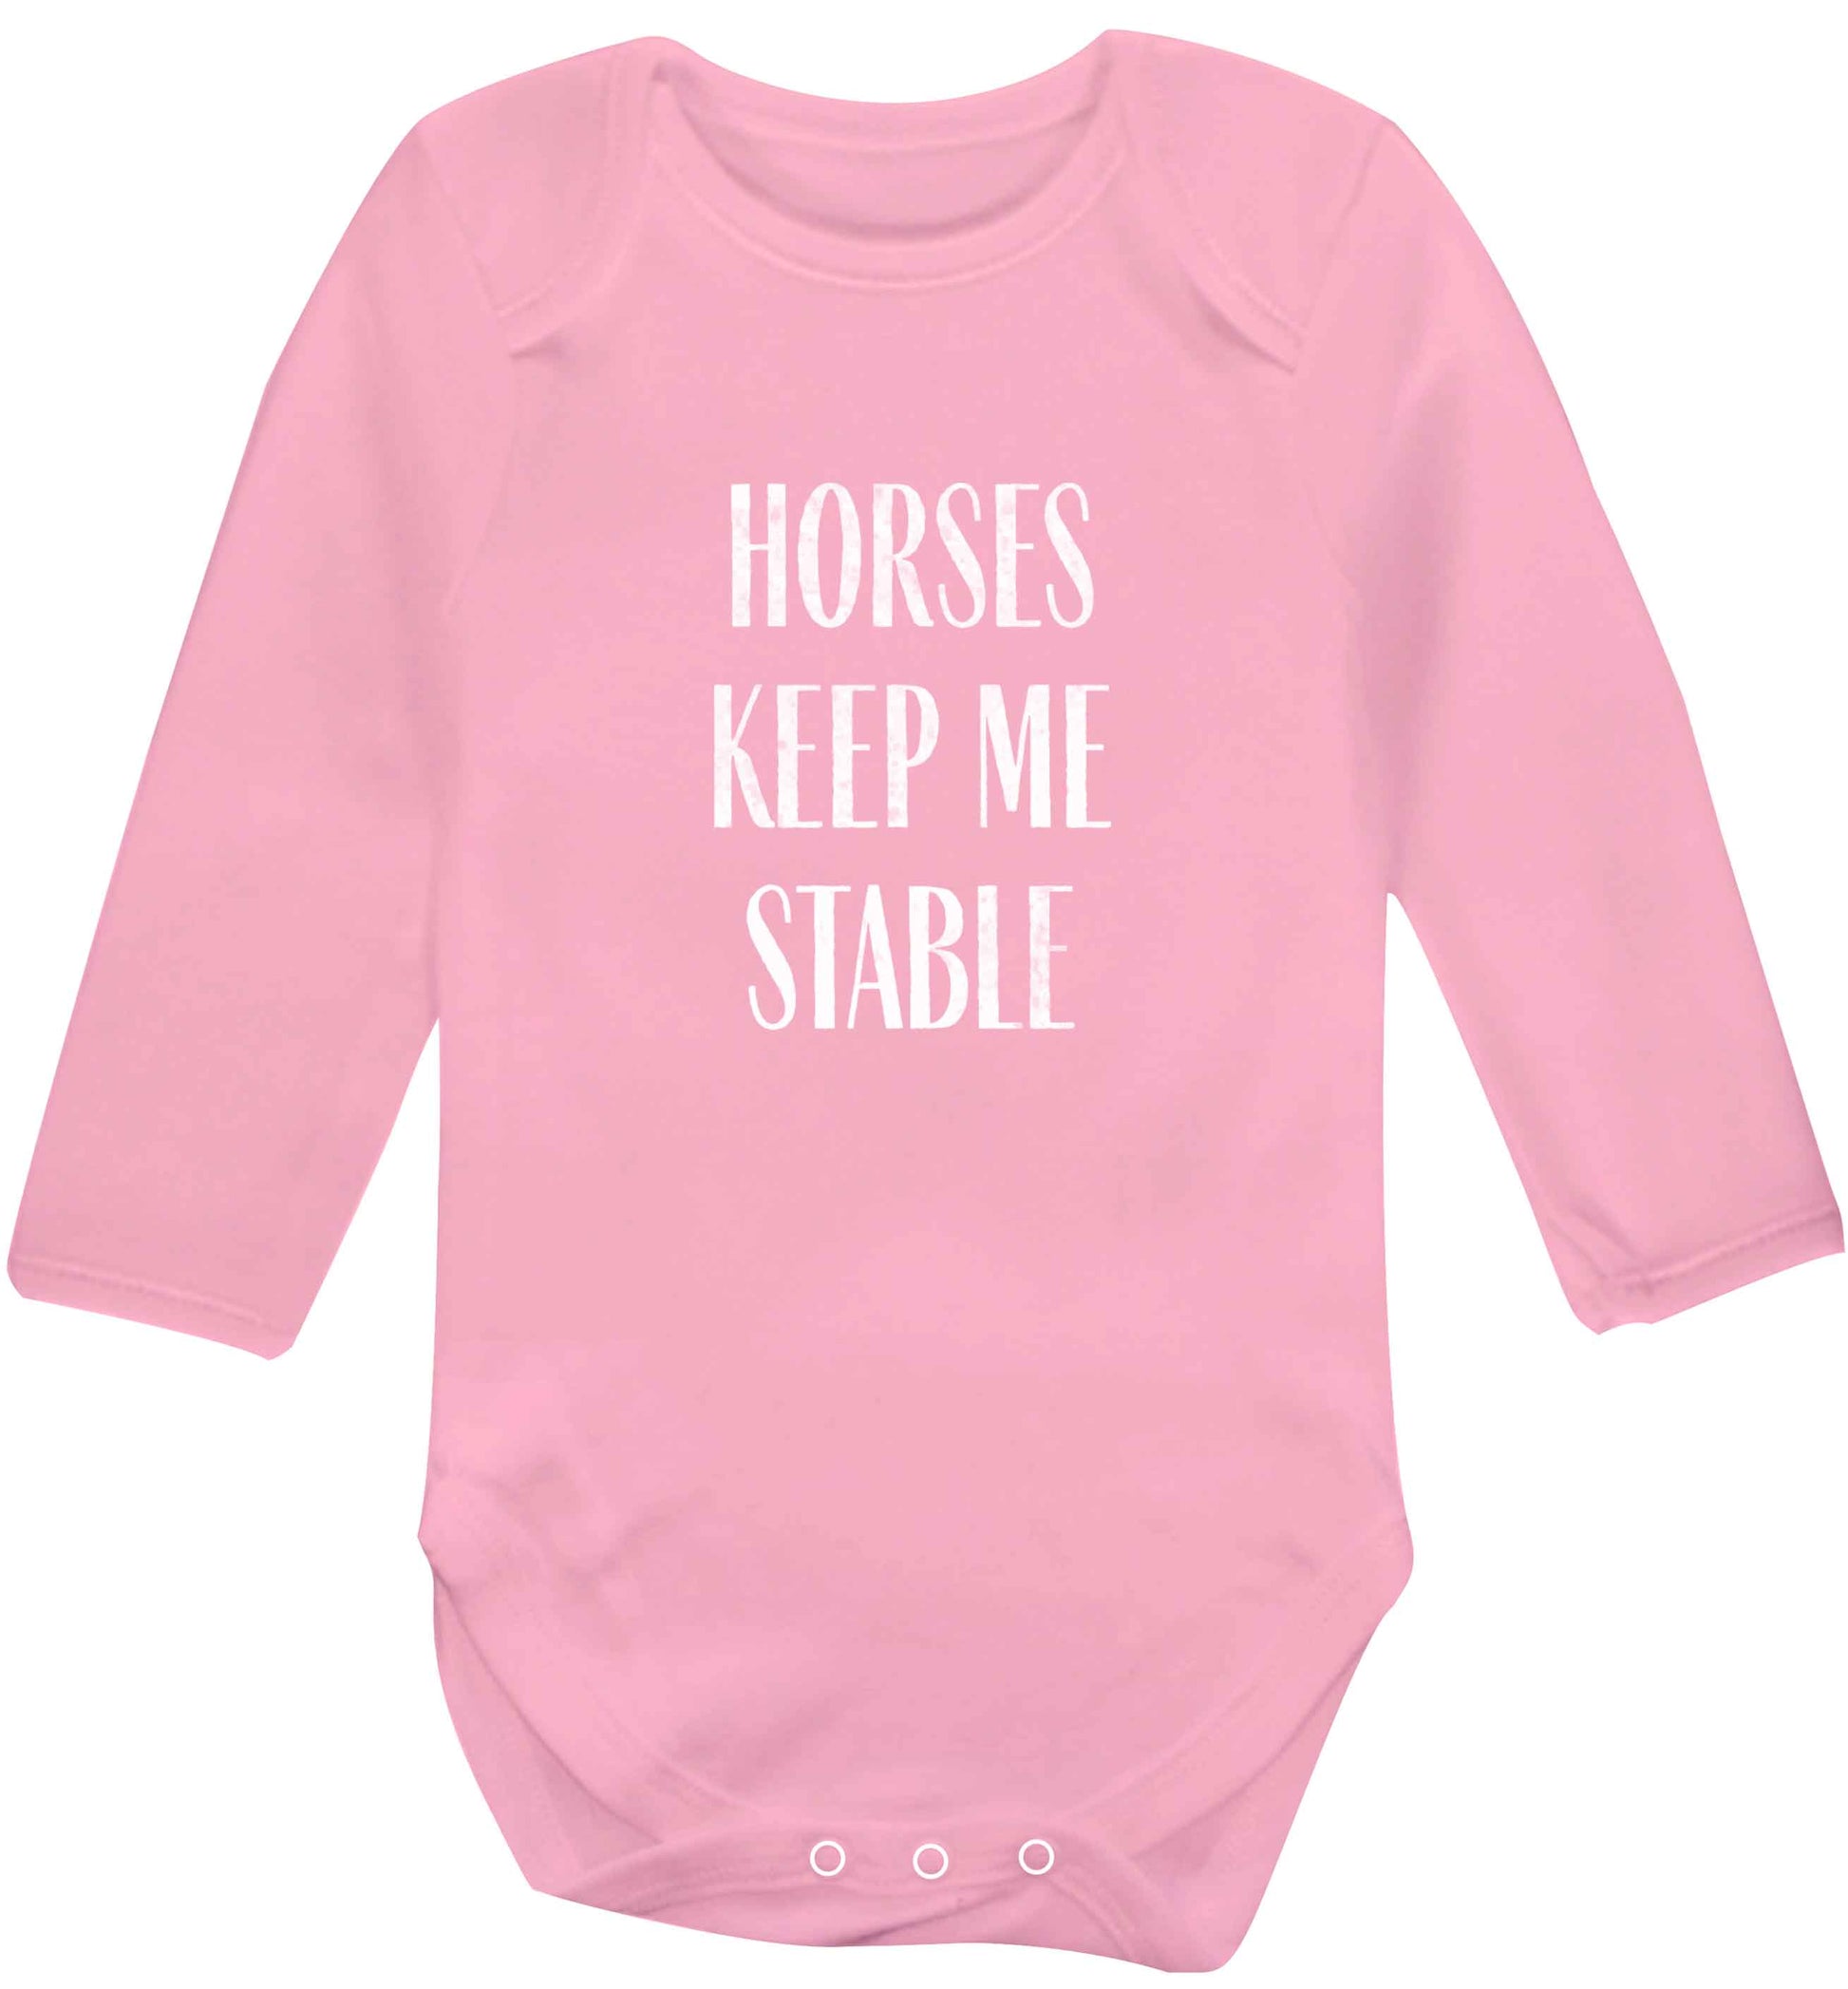 Horses keep me stable baby vest long sleeved pale pink 6-12 months